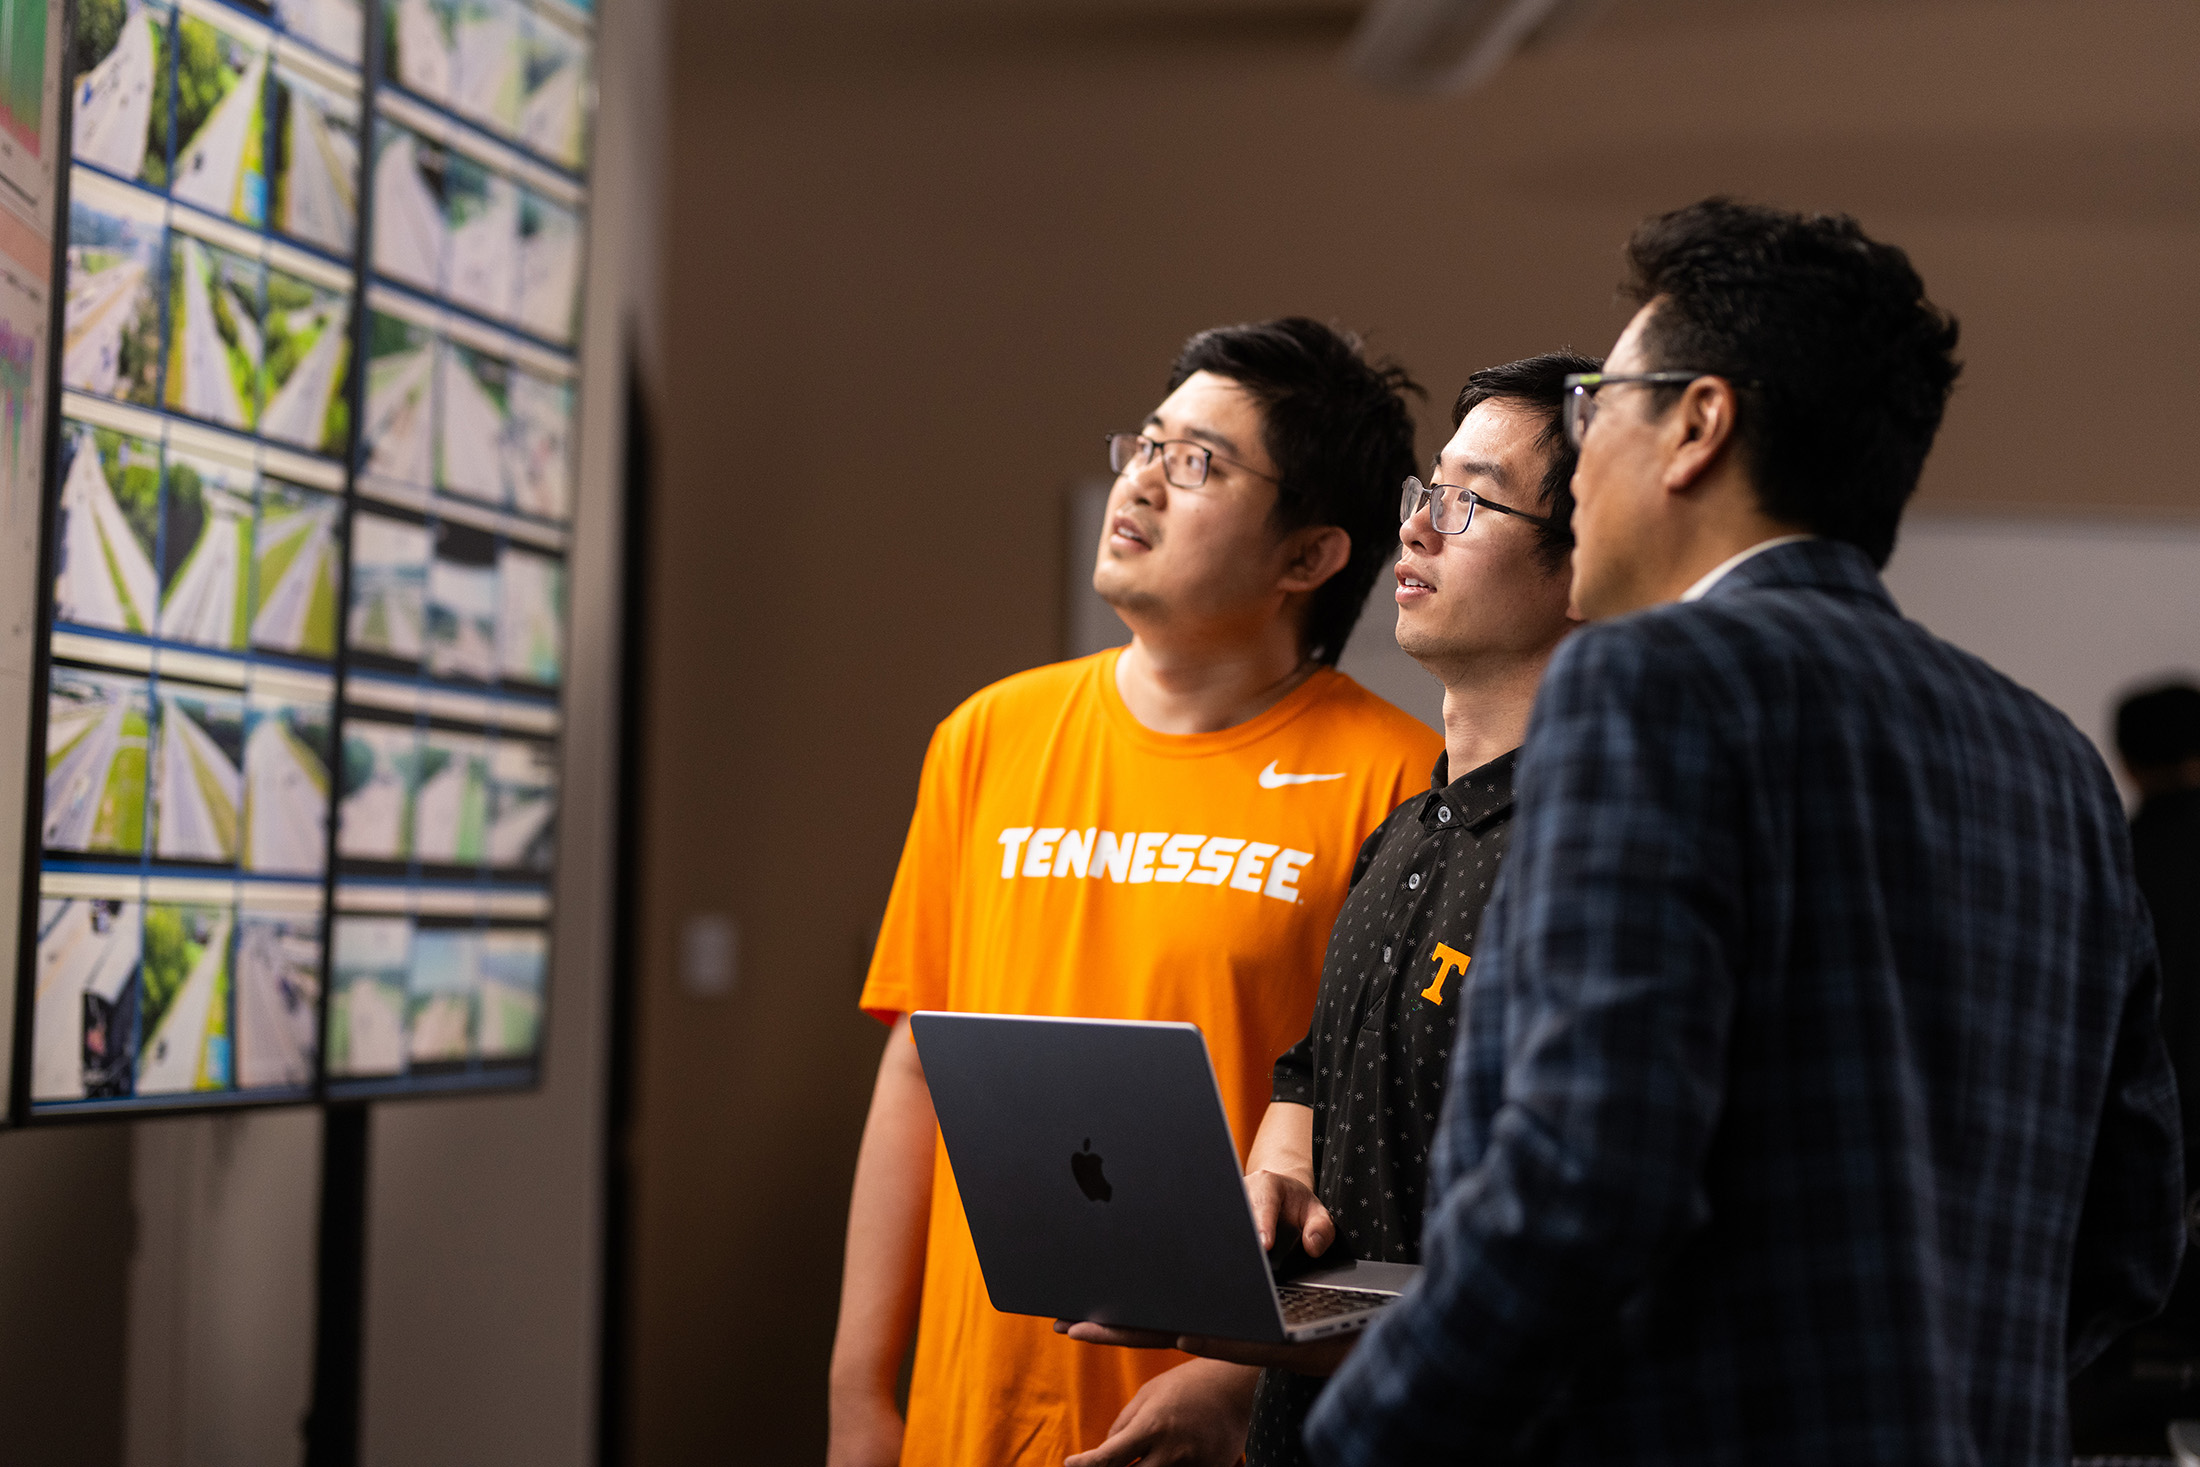 Lee Han talks to two graduate students about the content displayed on several monitors with live traffic cams and traffic data.